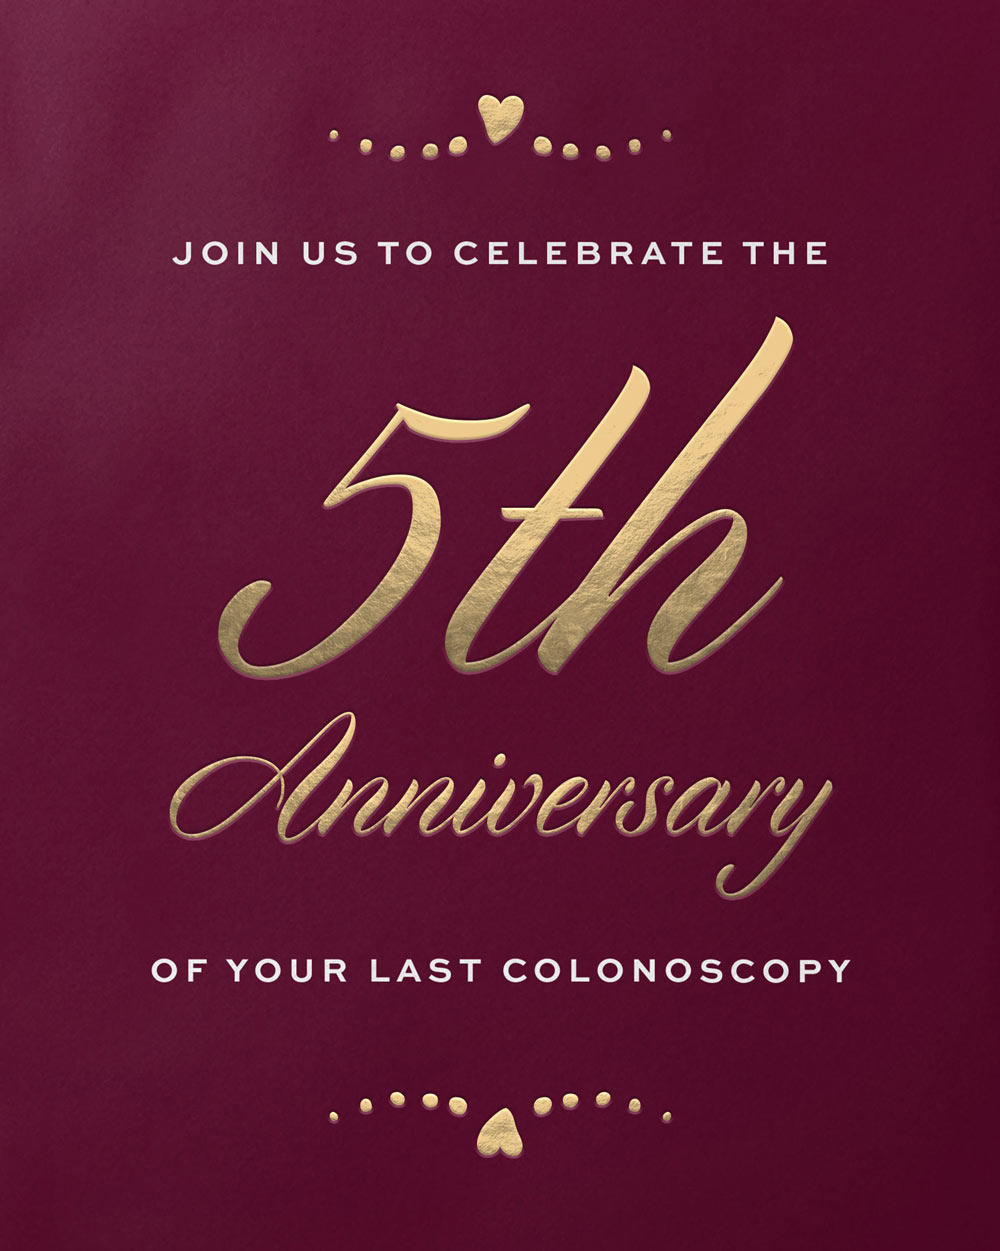 Join us to celebrate the 5th anniversary of your last colonoscopy.